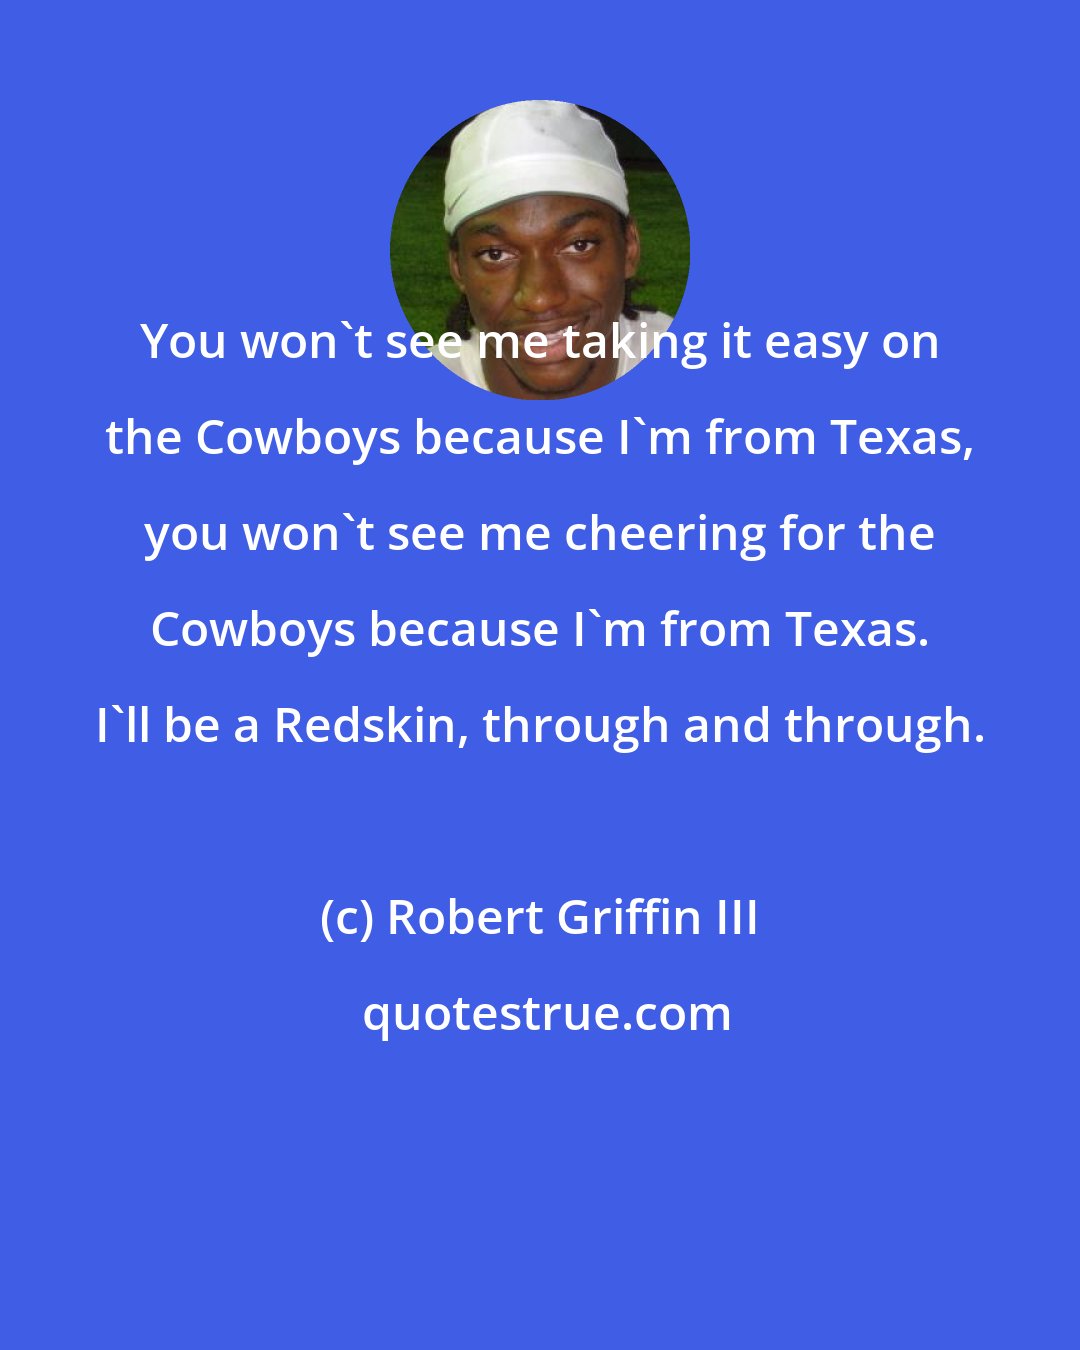 Robert Griffin III: You won't see me taking it easy on the Cowboys because I'm from Texas, you won't see me cheering for the Cowboys because I'm from Texas. I'll be a Redskin, through and through.